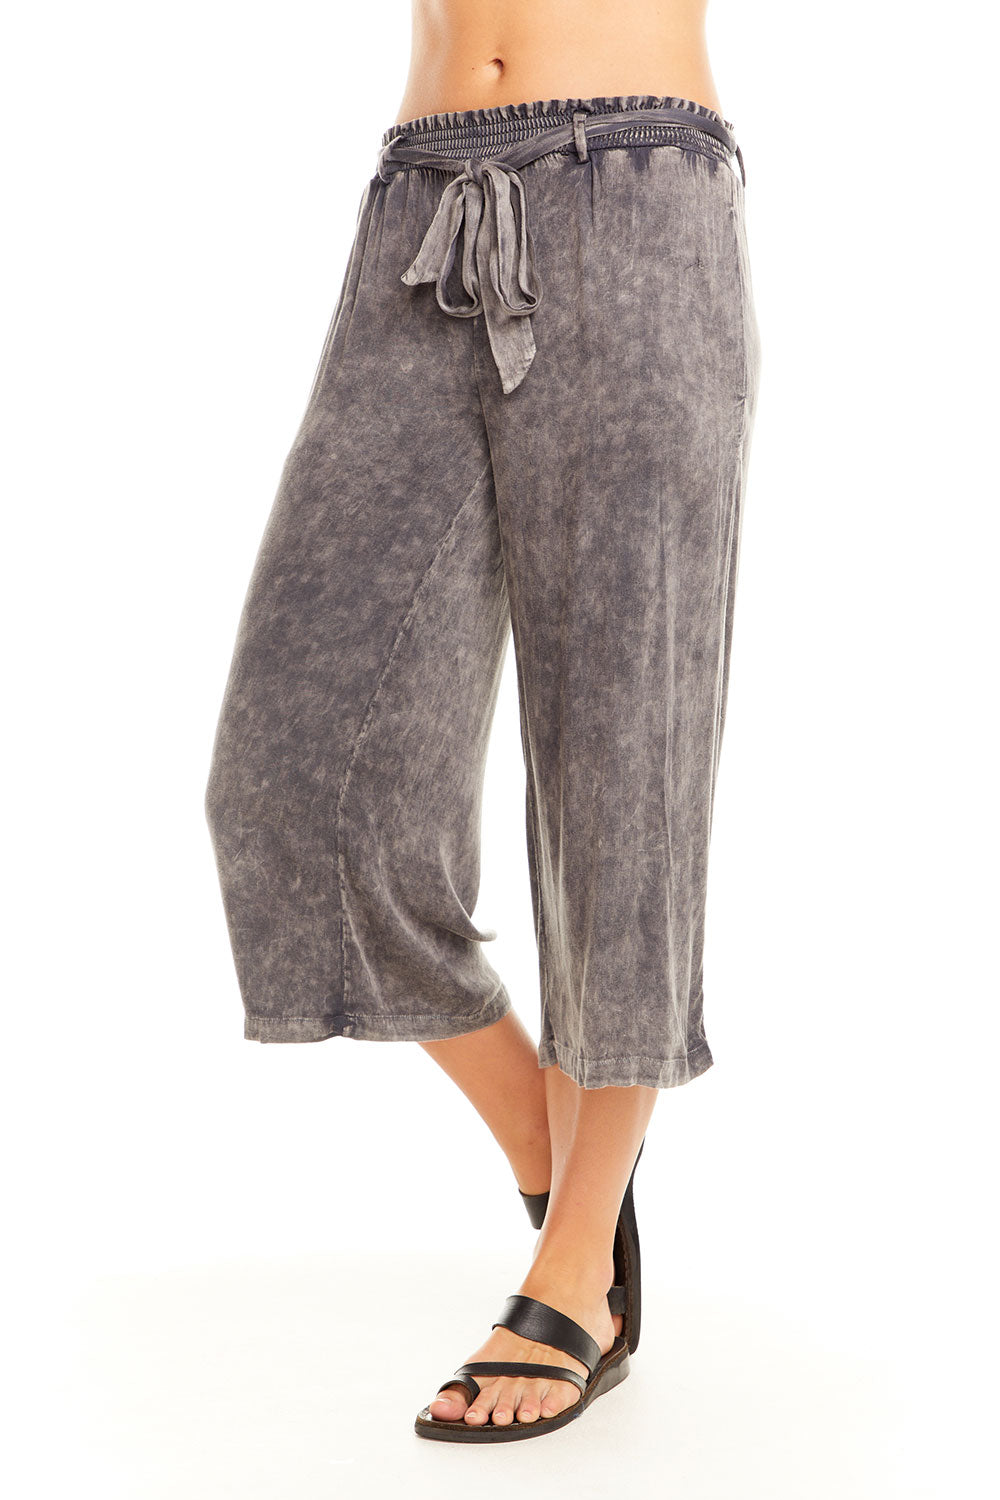 Heirloom Wovens Cropped Paperbag Waist Pant - chaserbrand.com